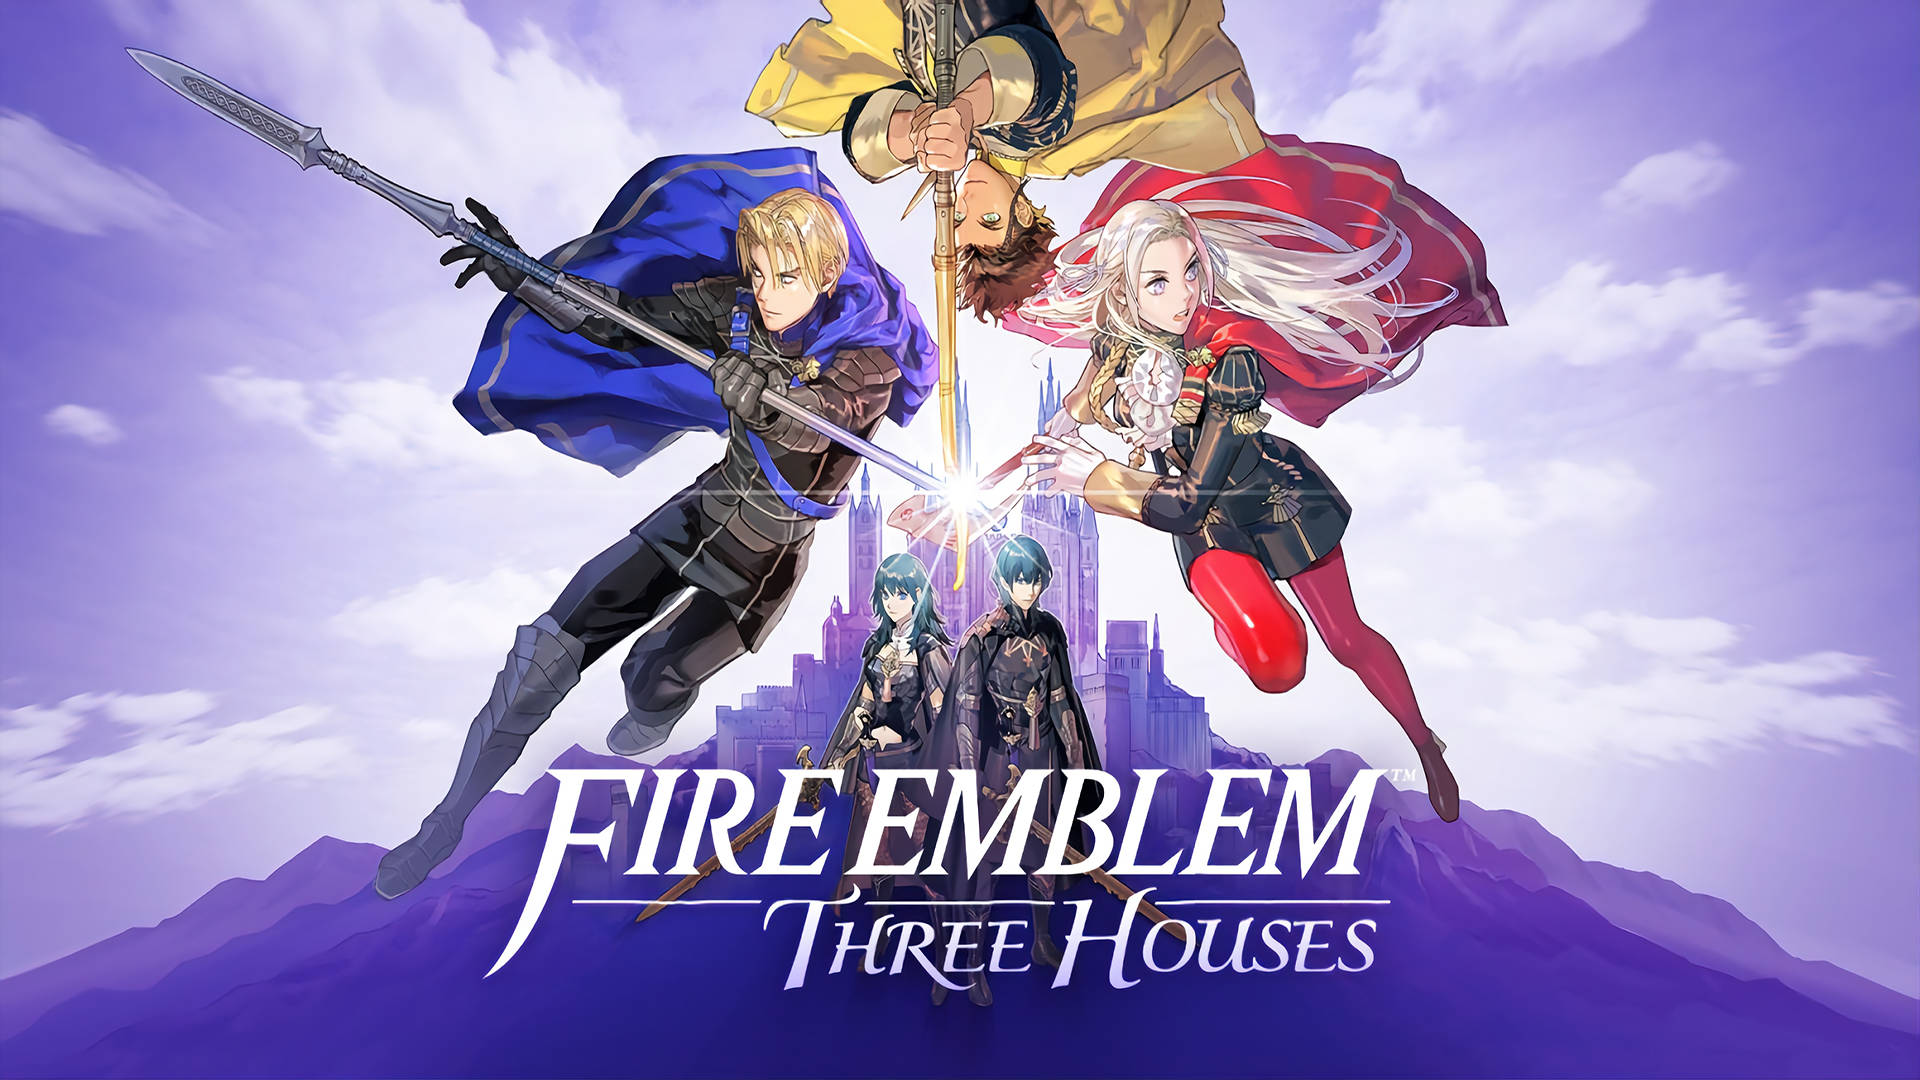 Top 999+ Fire Emblem Three Houses Wallpaper Full HD, 4K✅Free to Use